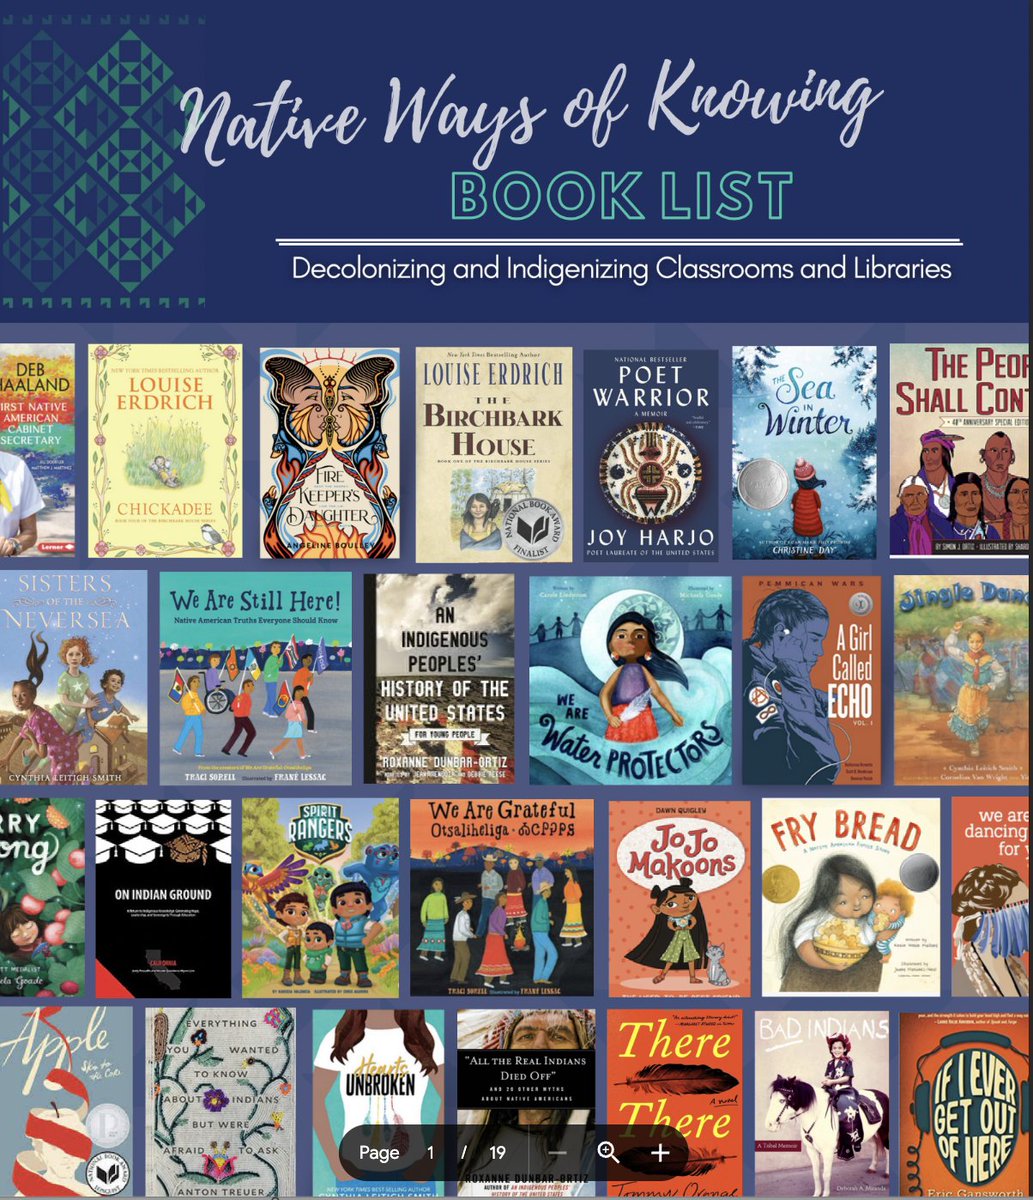 For a few years now, I've been working with California Indian Education for All (CIEFA) @cie4all. Recently, we worked on a downloadable booklist. Take a look! drive.google.com/file/d/1Cl-9BK…